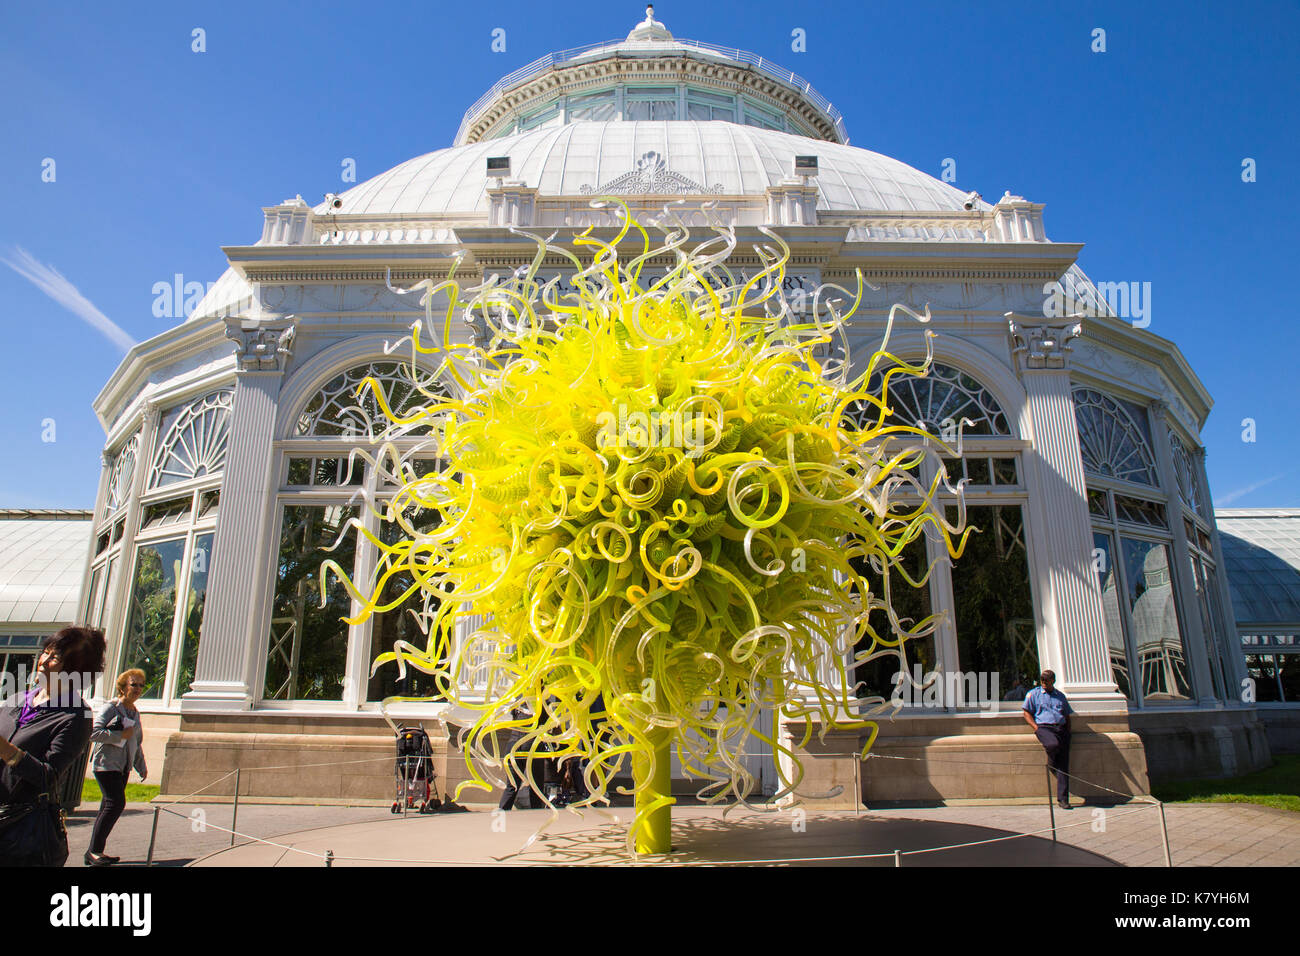 NEW YORK CITY - SEPTEMBER 1, 2017: View Chihuly glass sculpture at the historic Enid A. Haupt Conservatory located on the grounds of the New York Bota Stock Photo